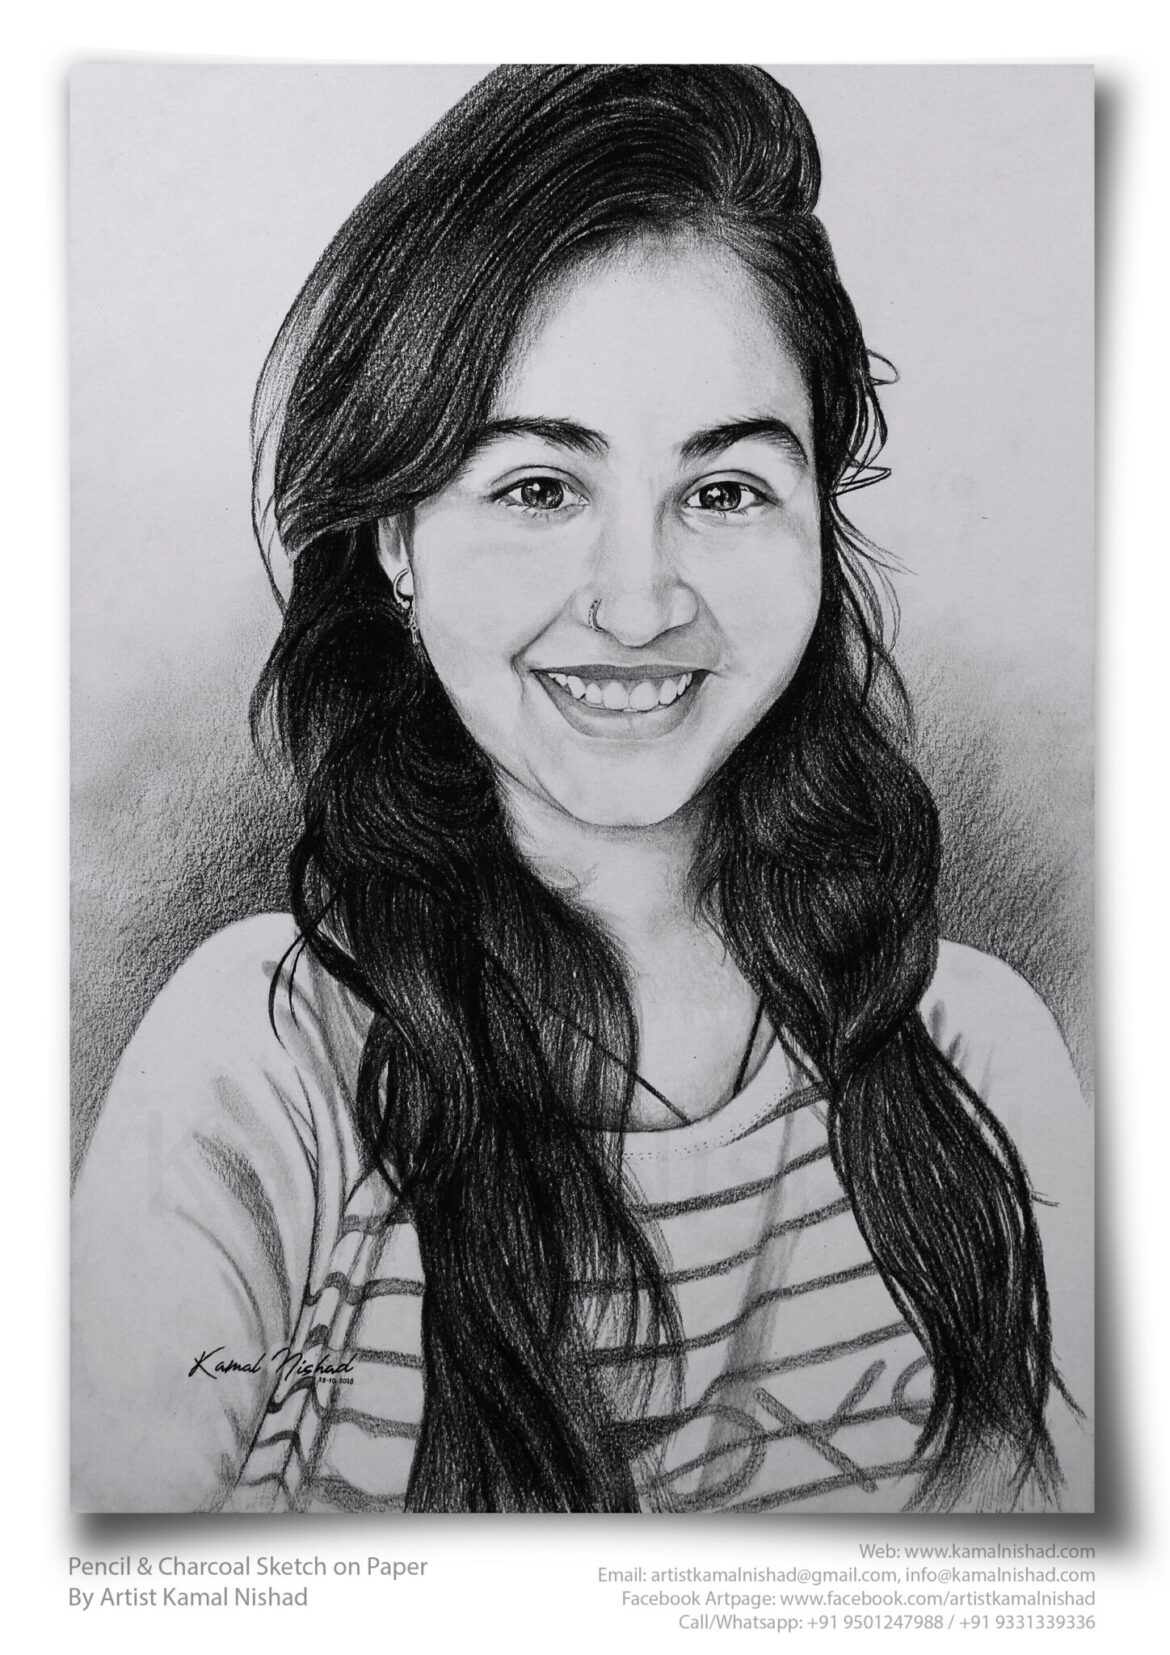 AMAZING SMILE | Pencil & Charcoal Sketch Title : AMAZING SMILE Medium : Pencil & Charcoal Sketch Size : A3 Paper size (Sketch size 18.5 x 23.7 cm*) Artist : Kamal Nishad This is a Handmade/hand-drawn Sketch made with Pencil & Charcoal “AMAZING SMILE”. One of my client/customer wanted me to draw this portrait for her friend. SIZE: Paper size A3 (work area 11.7 x 16.5 inches *estimated) Created by © Kamal Nishad. All rights reserved.